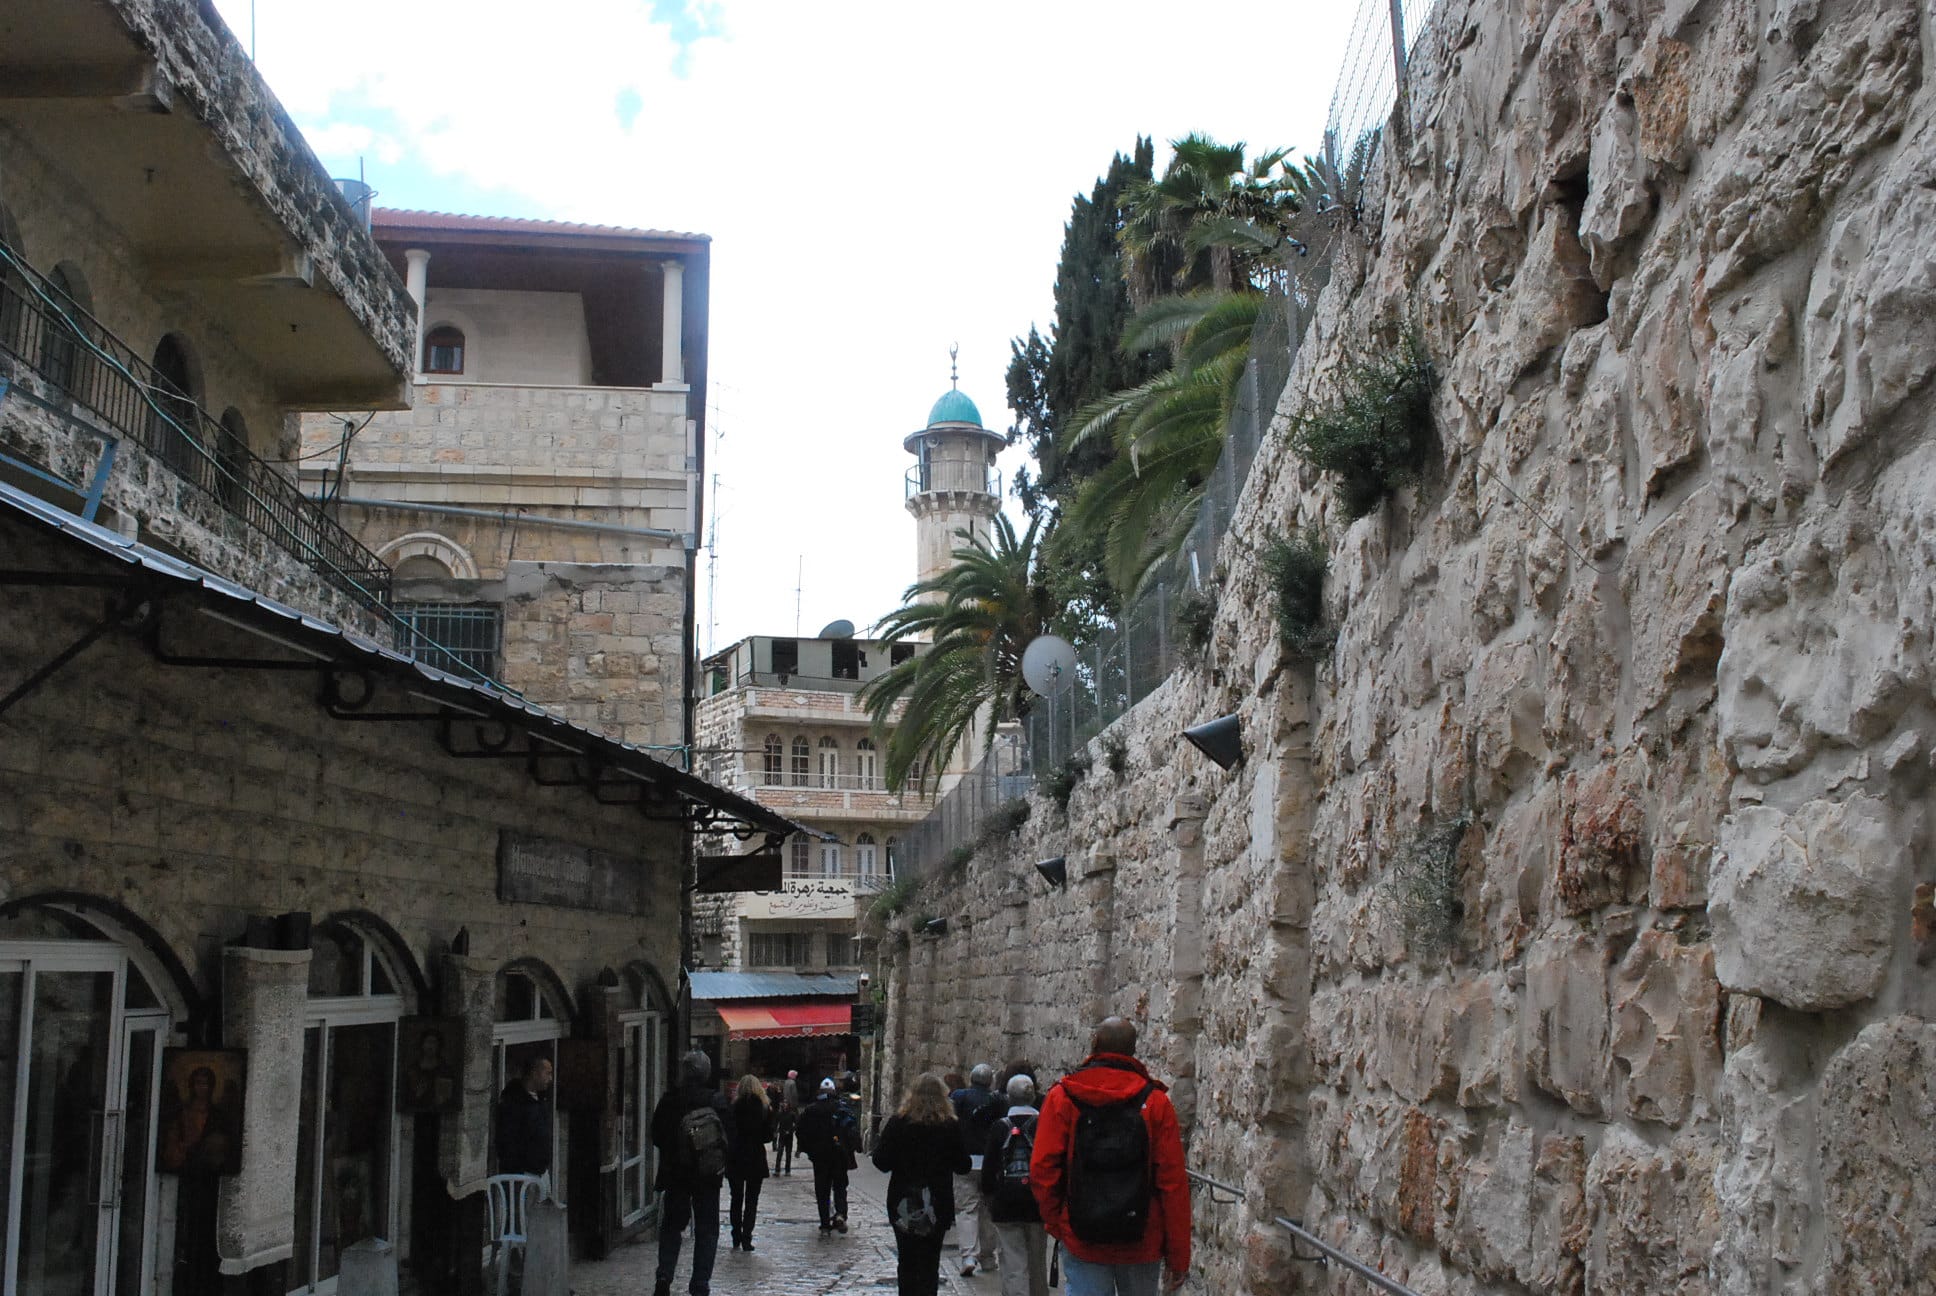 Walking along Via Dolorosa - the processional route in the Old City of Jerusalem. Photo: Tonya Fitzpatrick